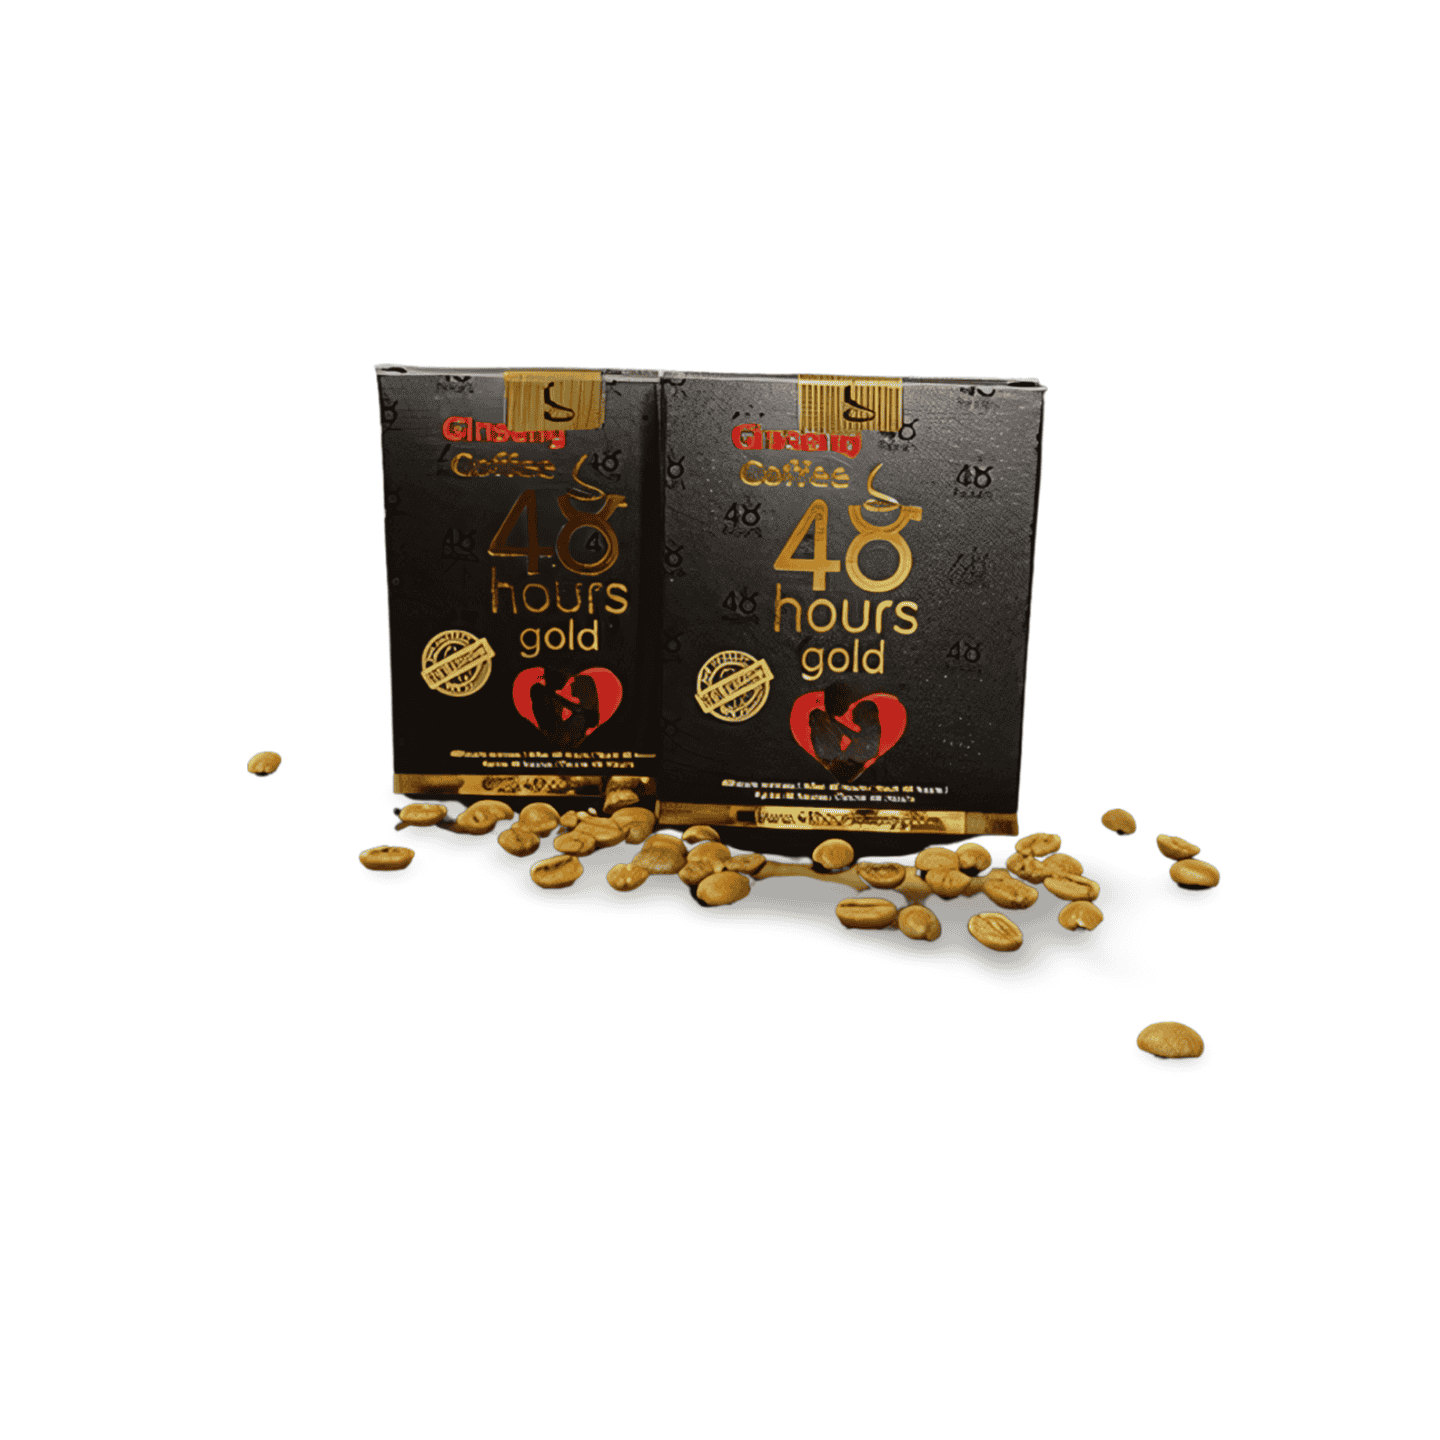 Ginseng Coffee 48 Hours Gold